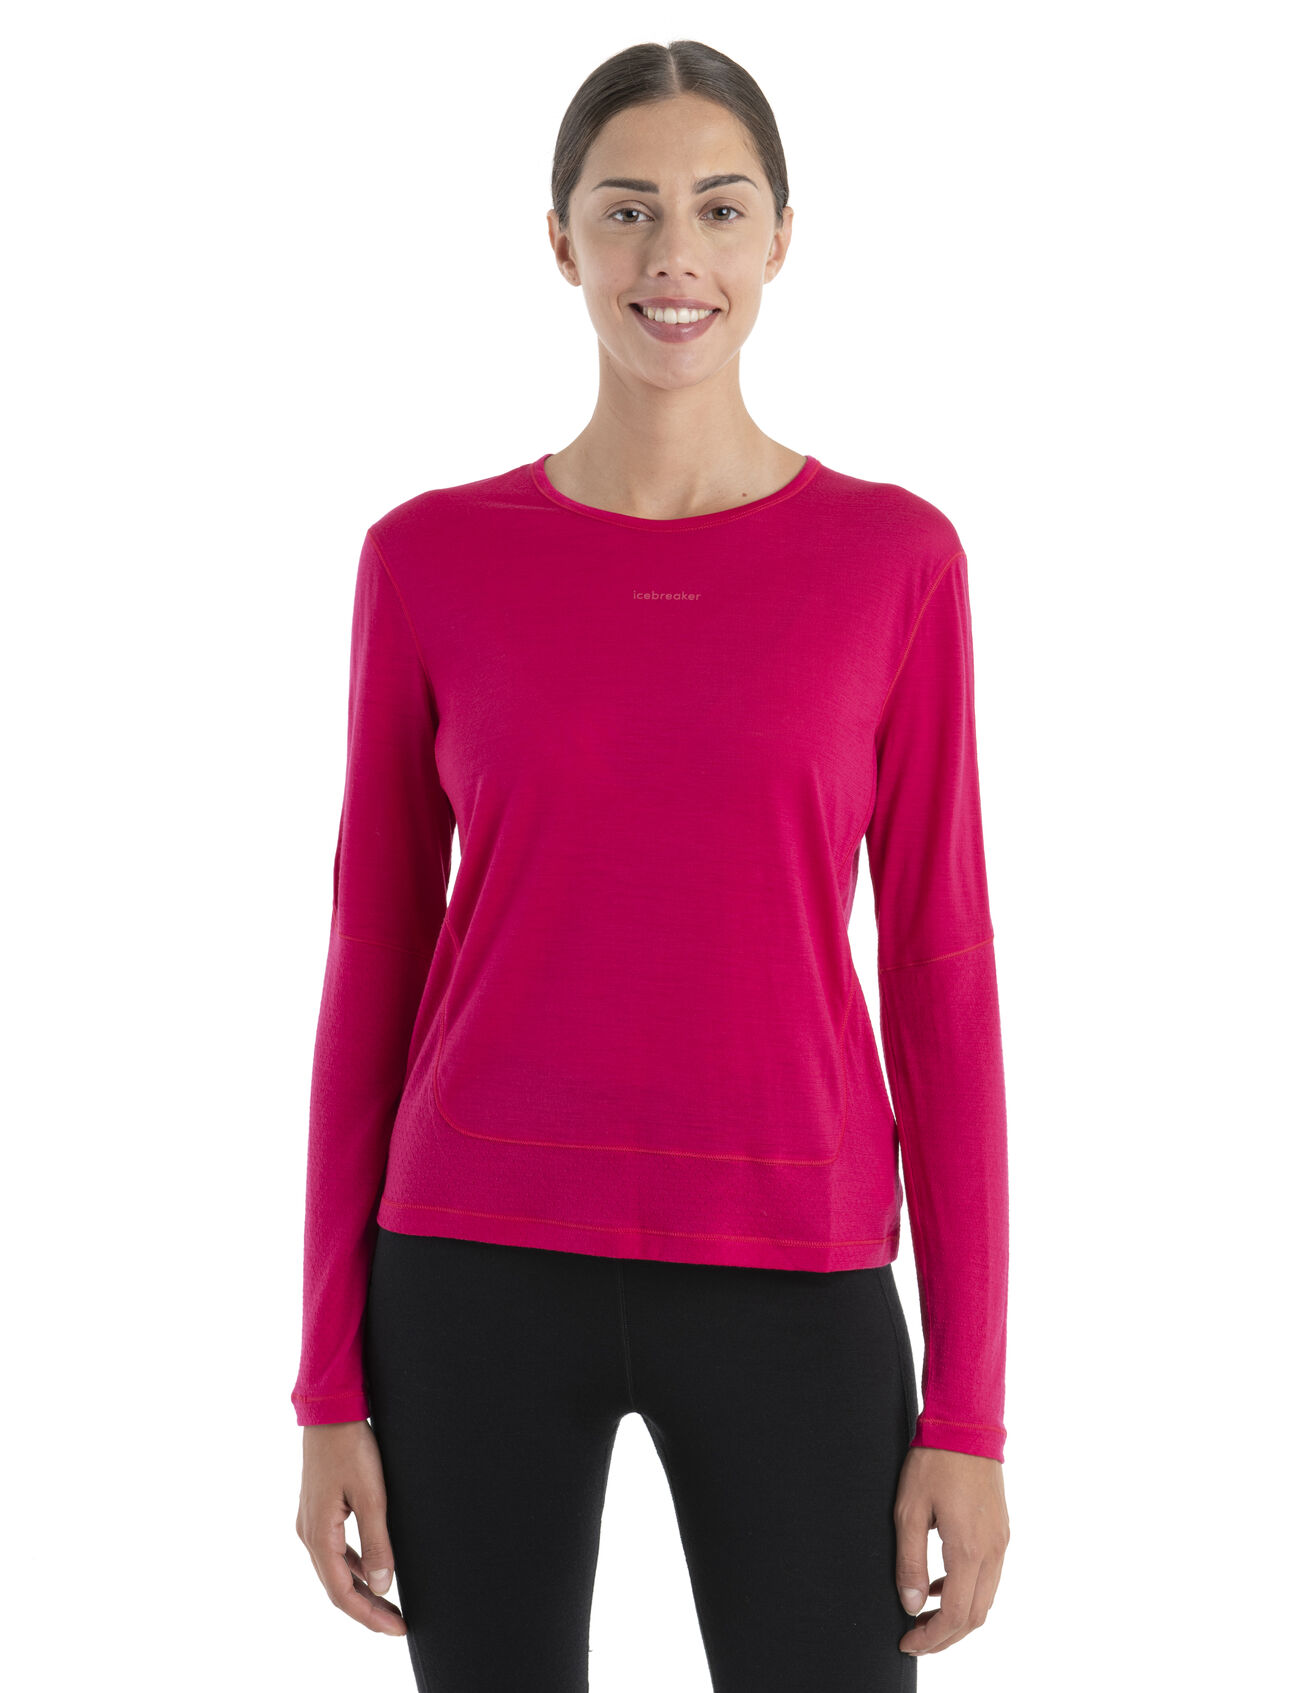 Womens 125 ZoneKnit™ Merino Energy Wind Long Sleeve T-Shirt Our most breathable, lightweight top for high-output activities, the 125 ZoneKnit™ Energy Wind Long Sleeve T-Shirt features a body-mapped combination of Cool-Lite merino jersey and ultra-breathable eyelet mesh to help keep you cool.